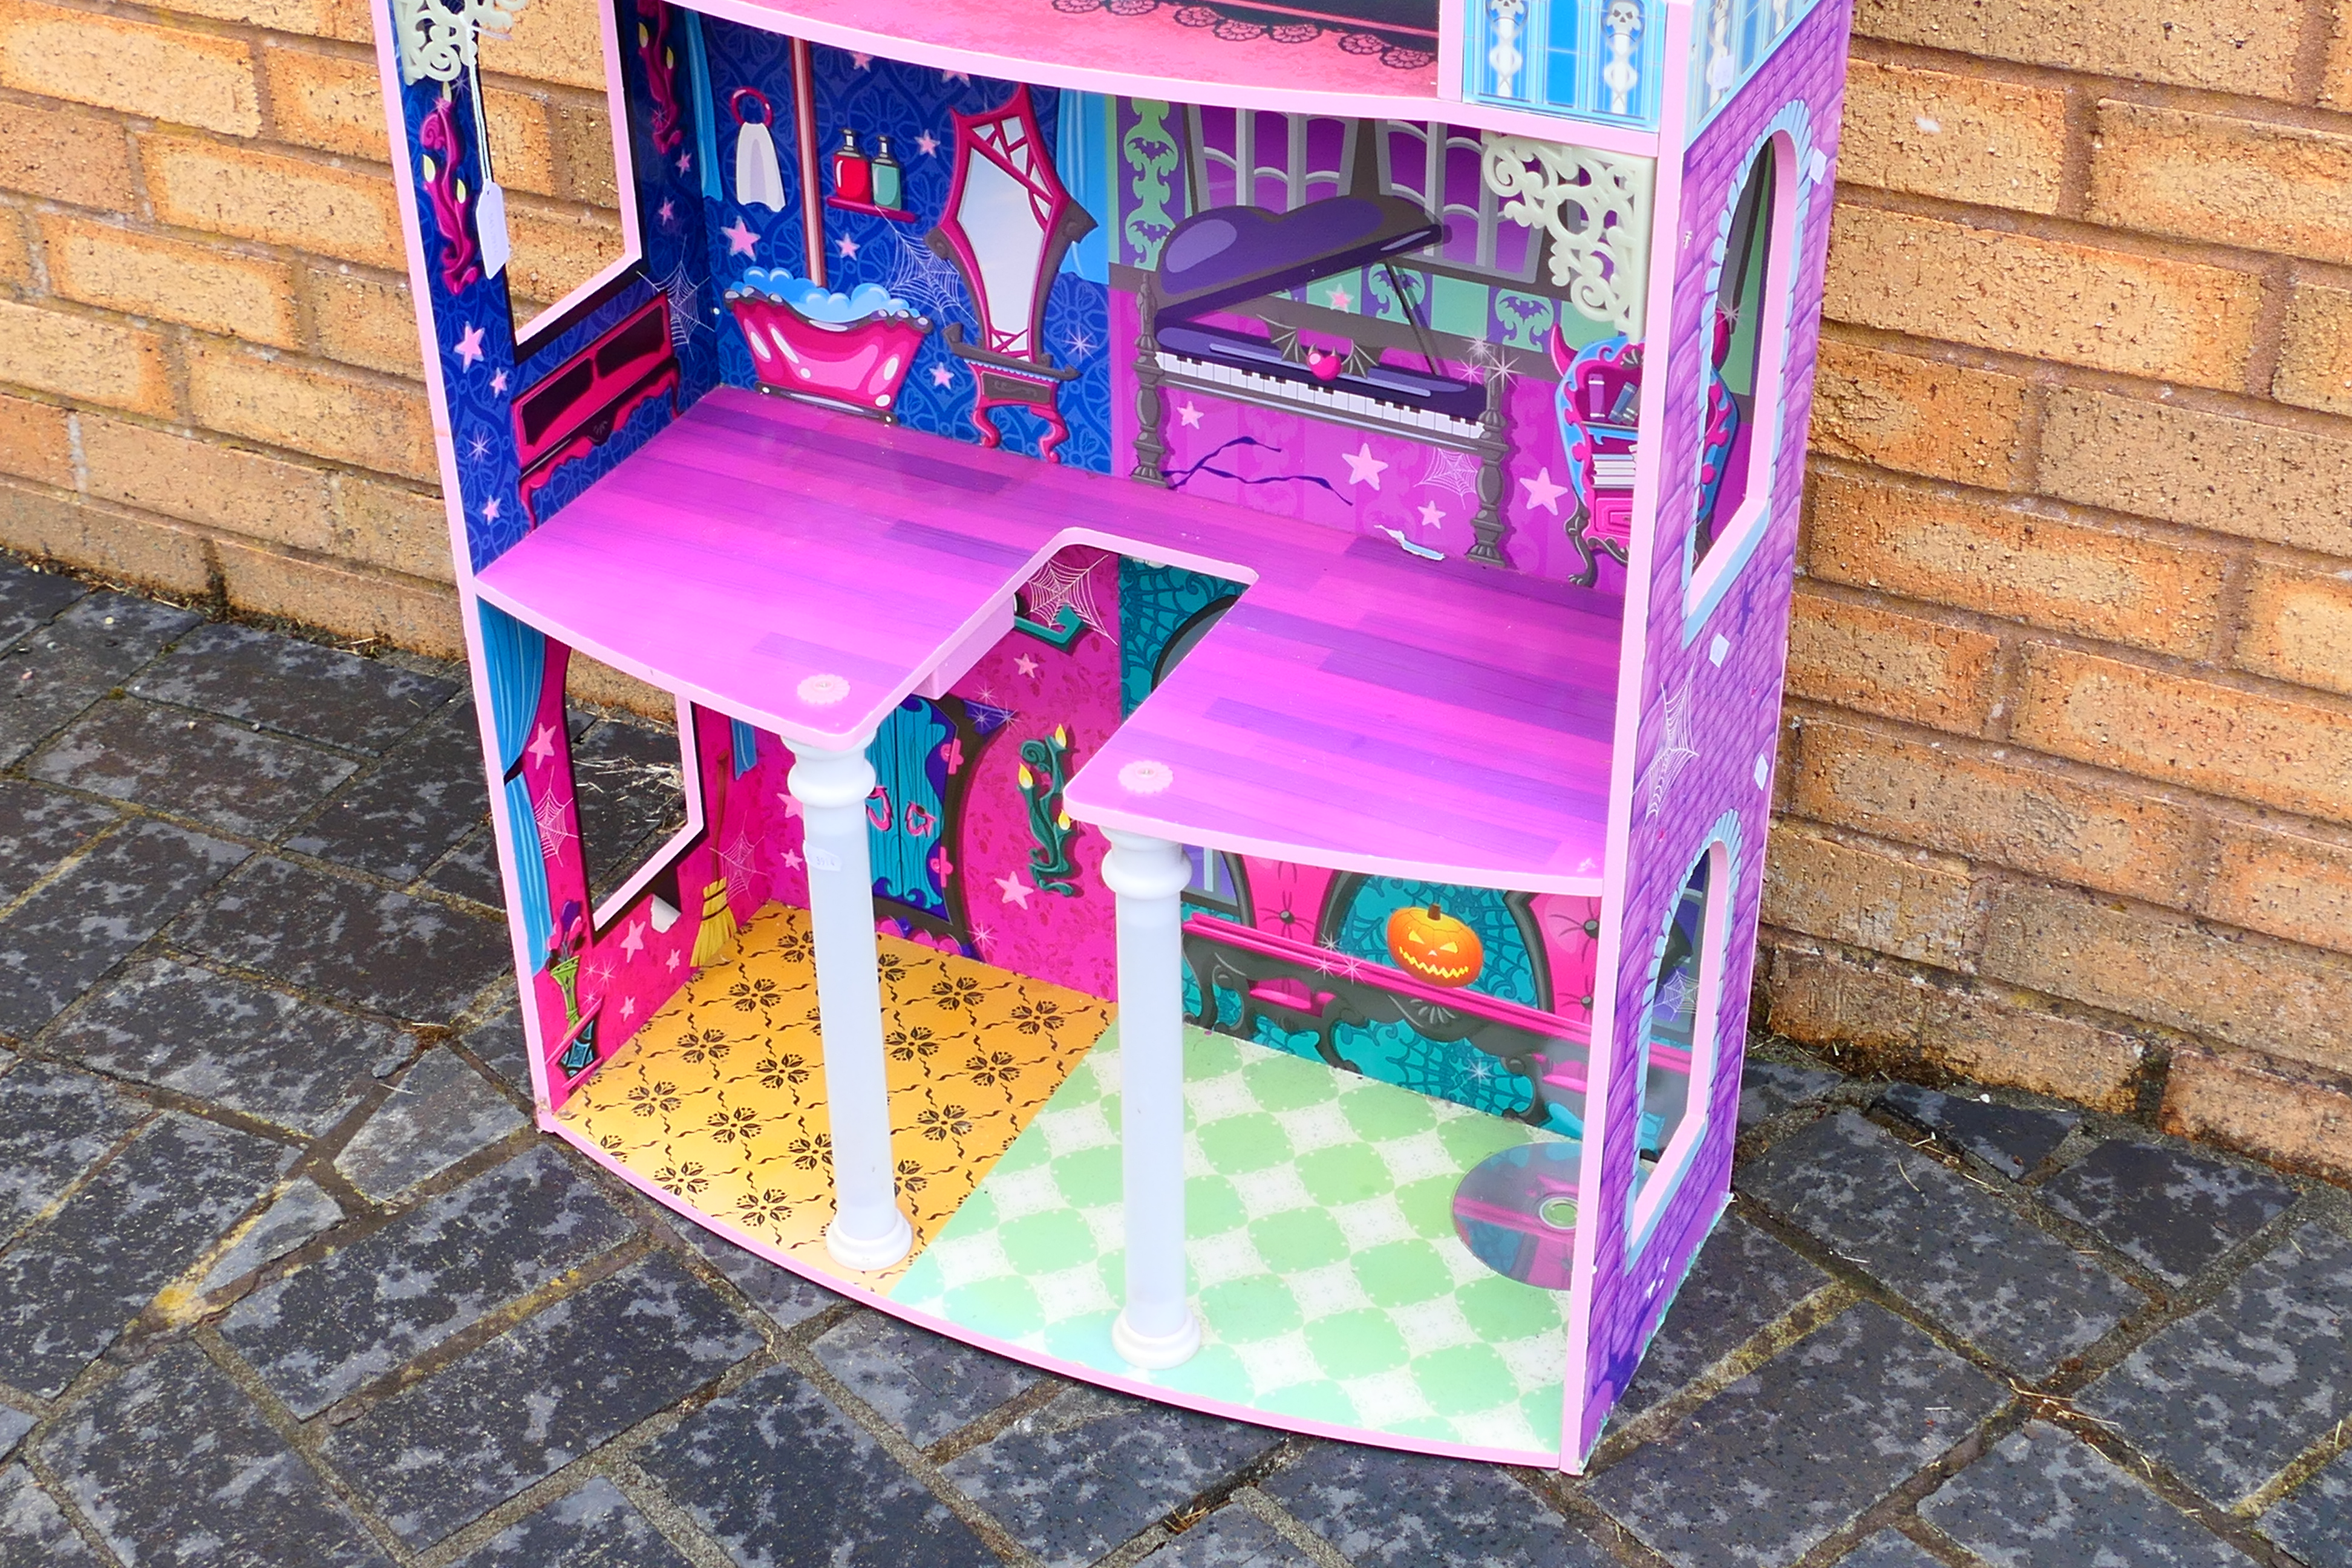 A Monster High dolls house measuring 118 x 62 x 29 cm with light up pillars. - Image 4 of 4